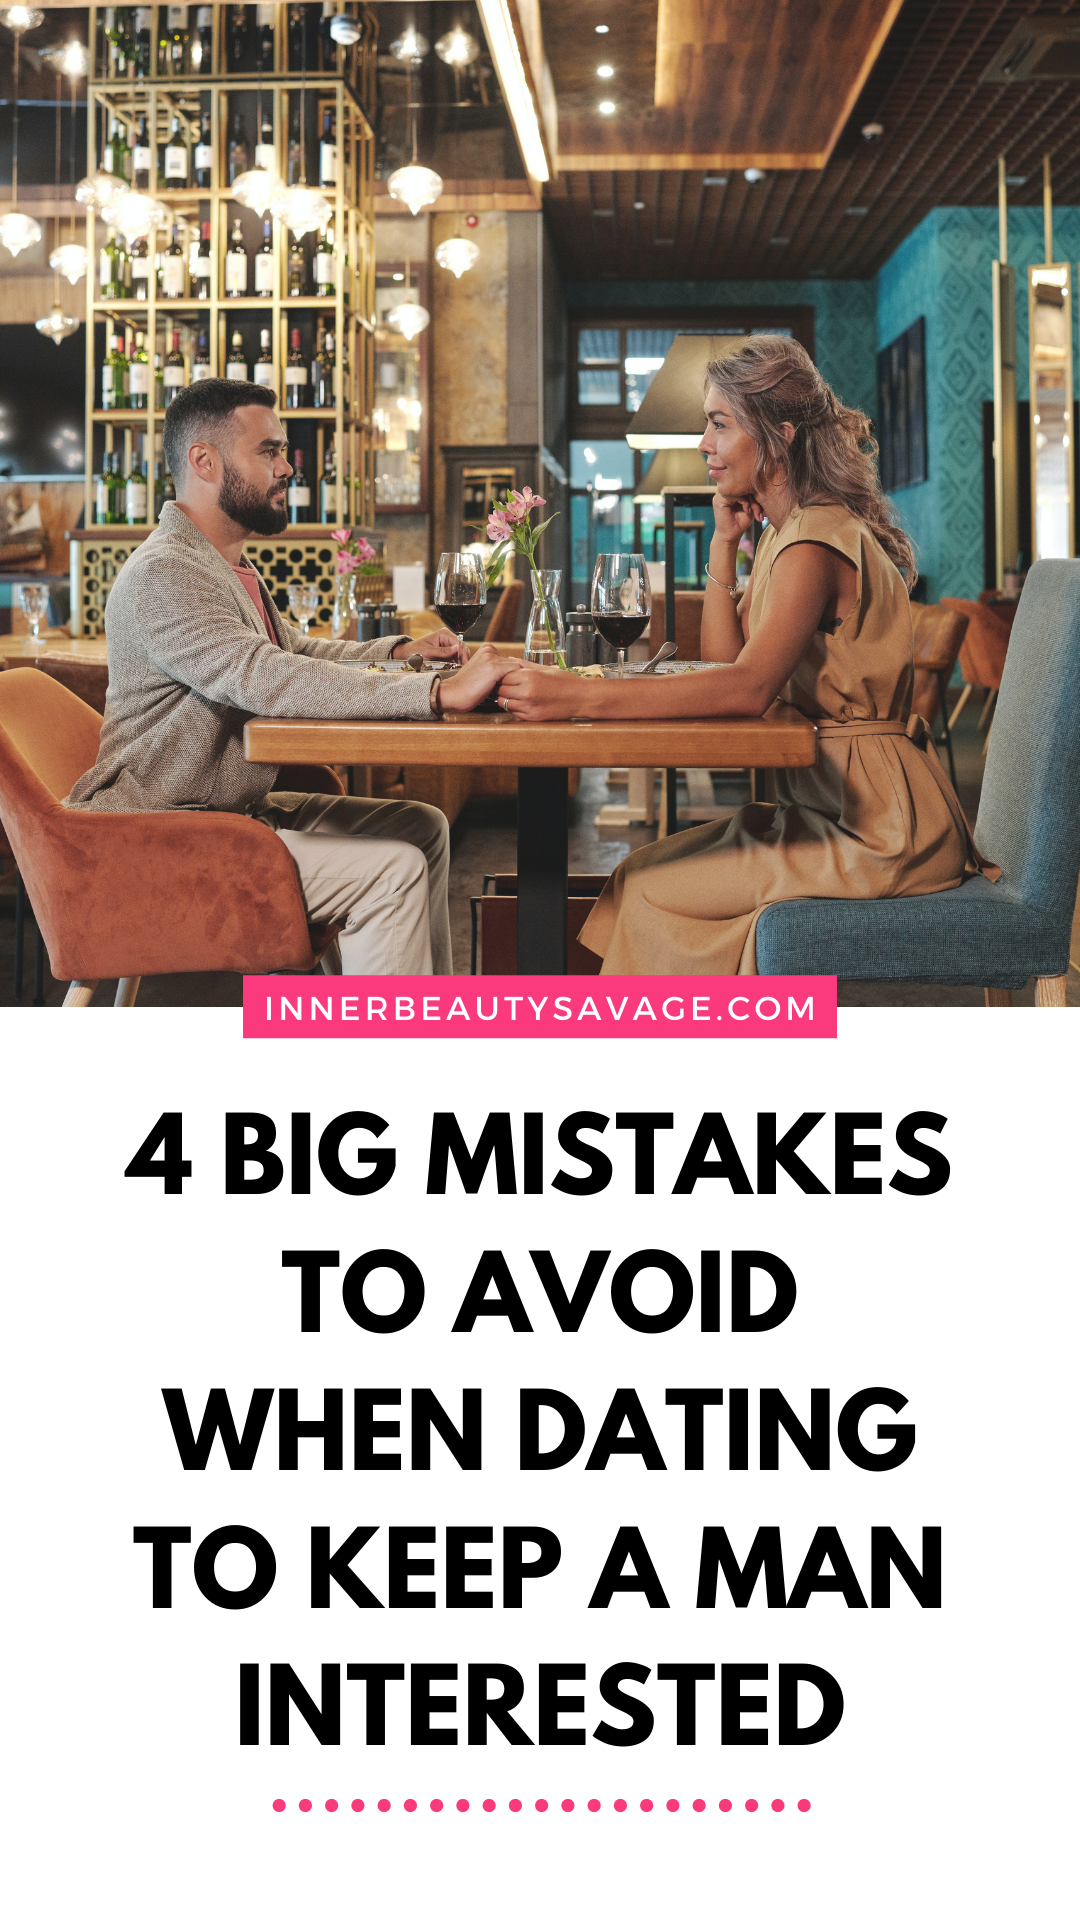 Pinterest Pin on the 4 Big Mistakes Women Make When Dating